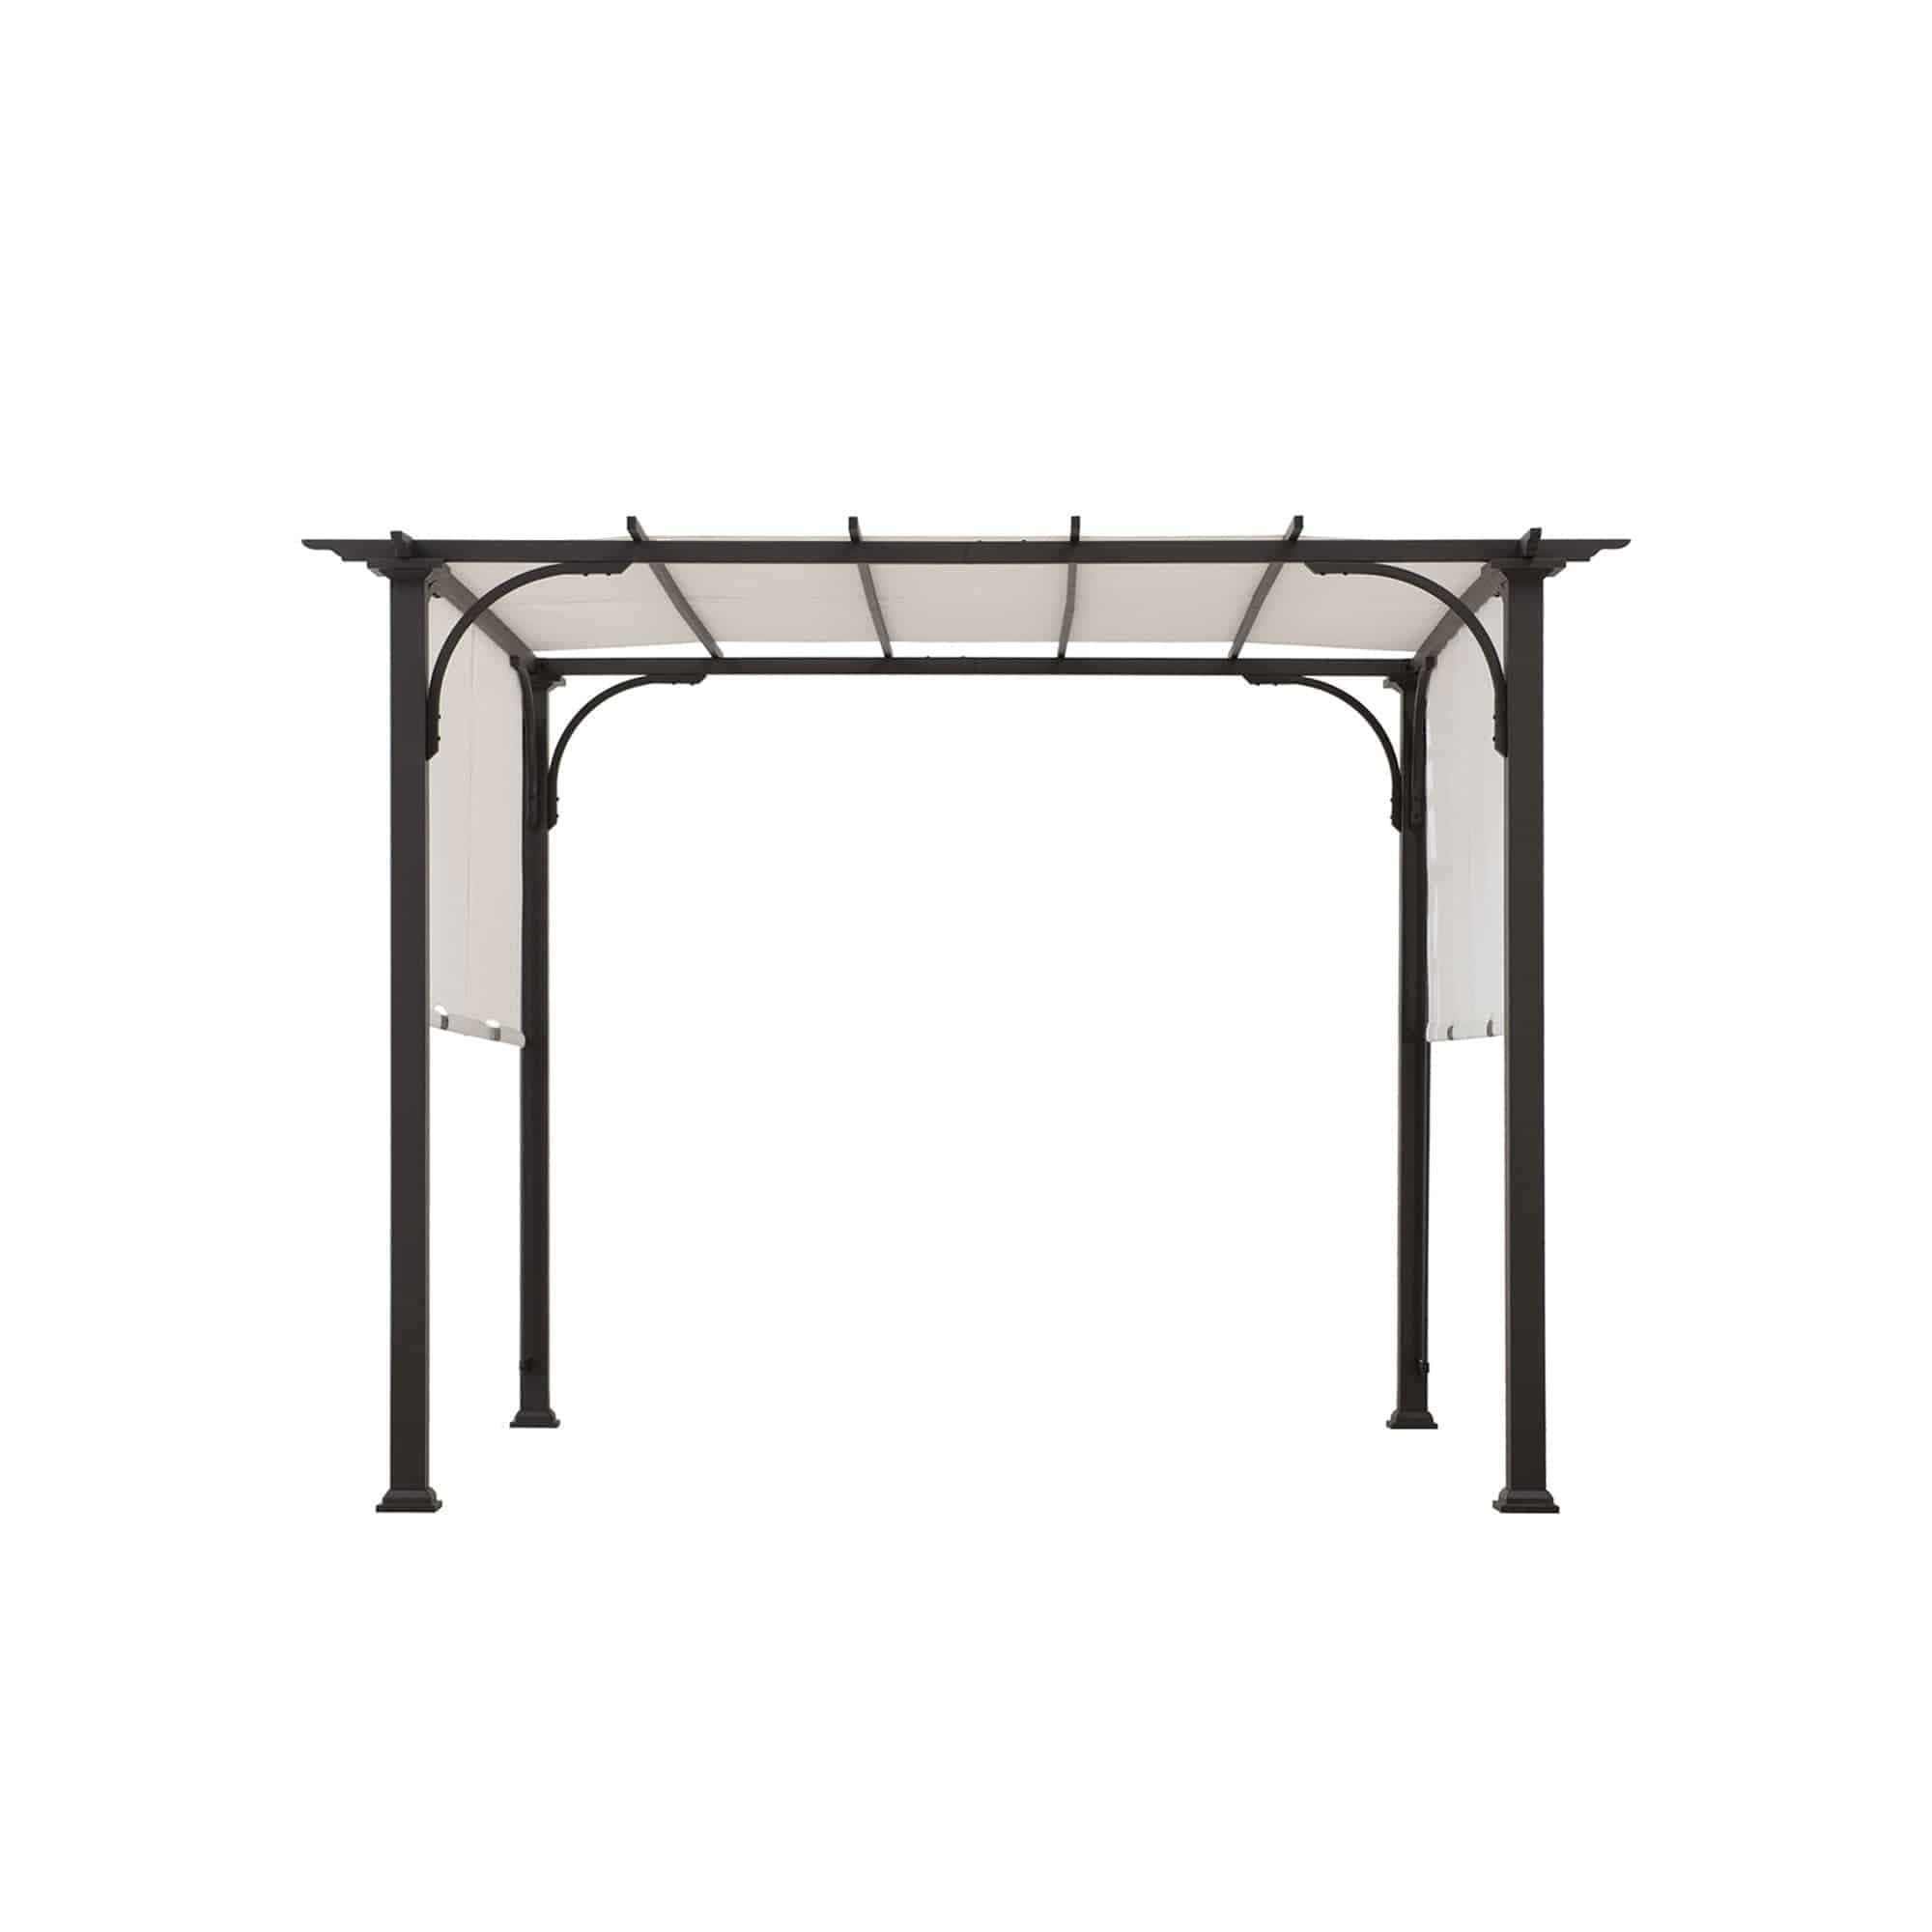 Sunjoy 10 ft. x 10 ft. White Steel Frame Pergola with Adjustable Canopy